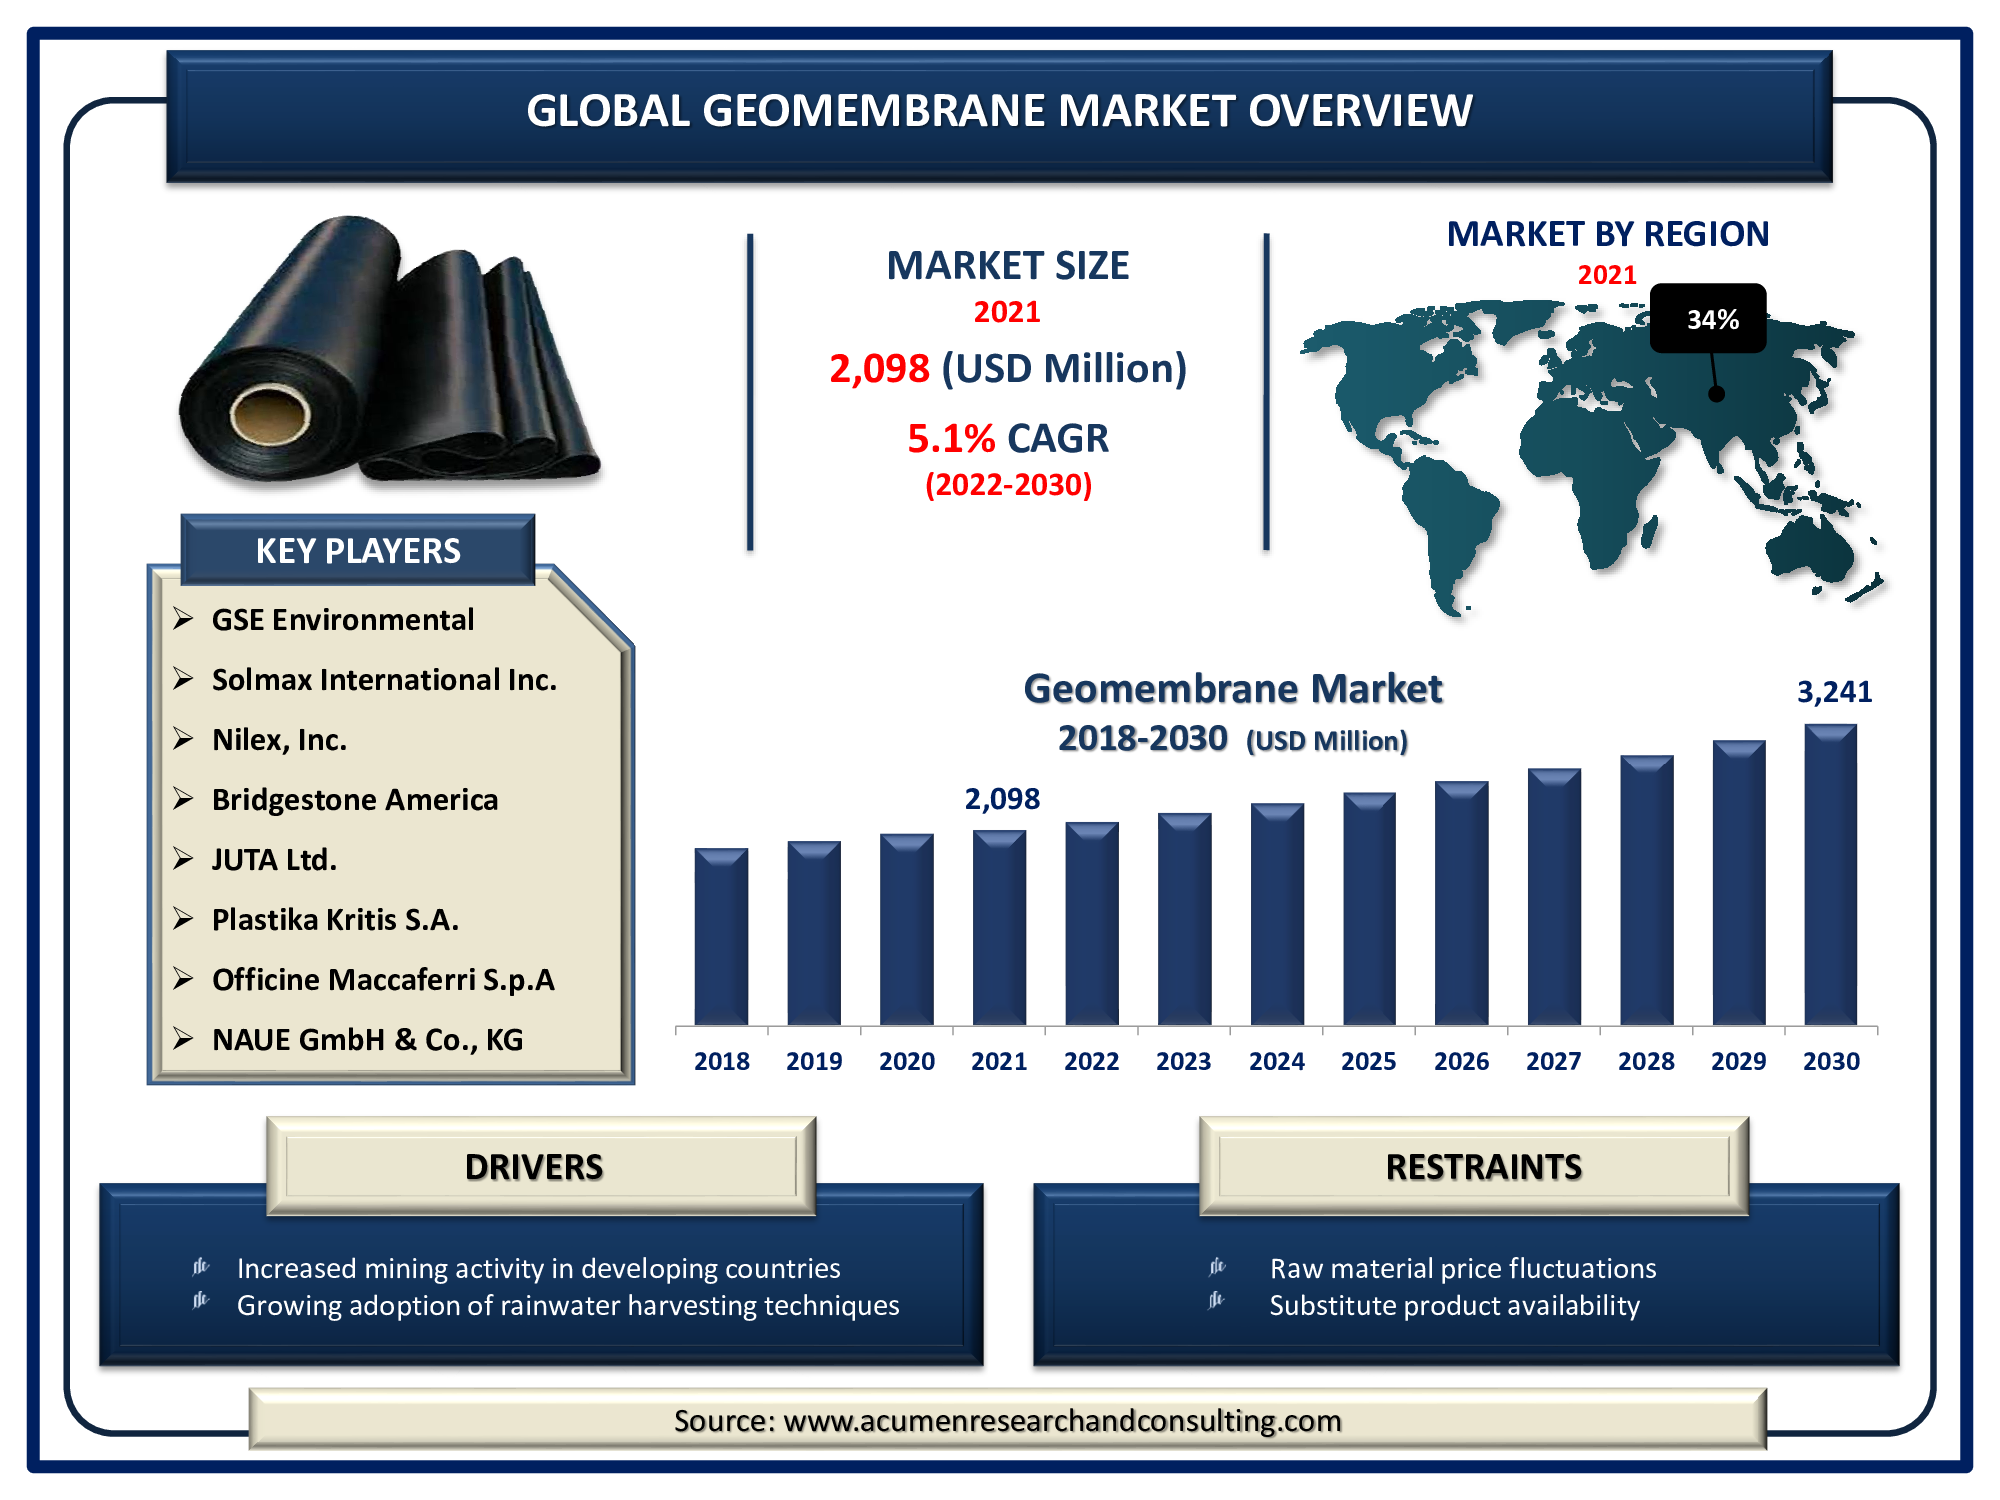 Geomembrane Market size accounted for USD 2,098 Million in 2021 and is expected to reach USD 3,241 Million by 2030 at a considerable CAGR of 5.1% during the forecast period from 2022 to 2030.